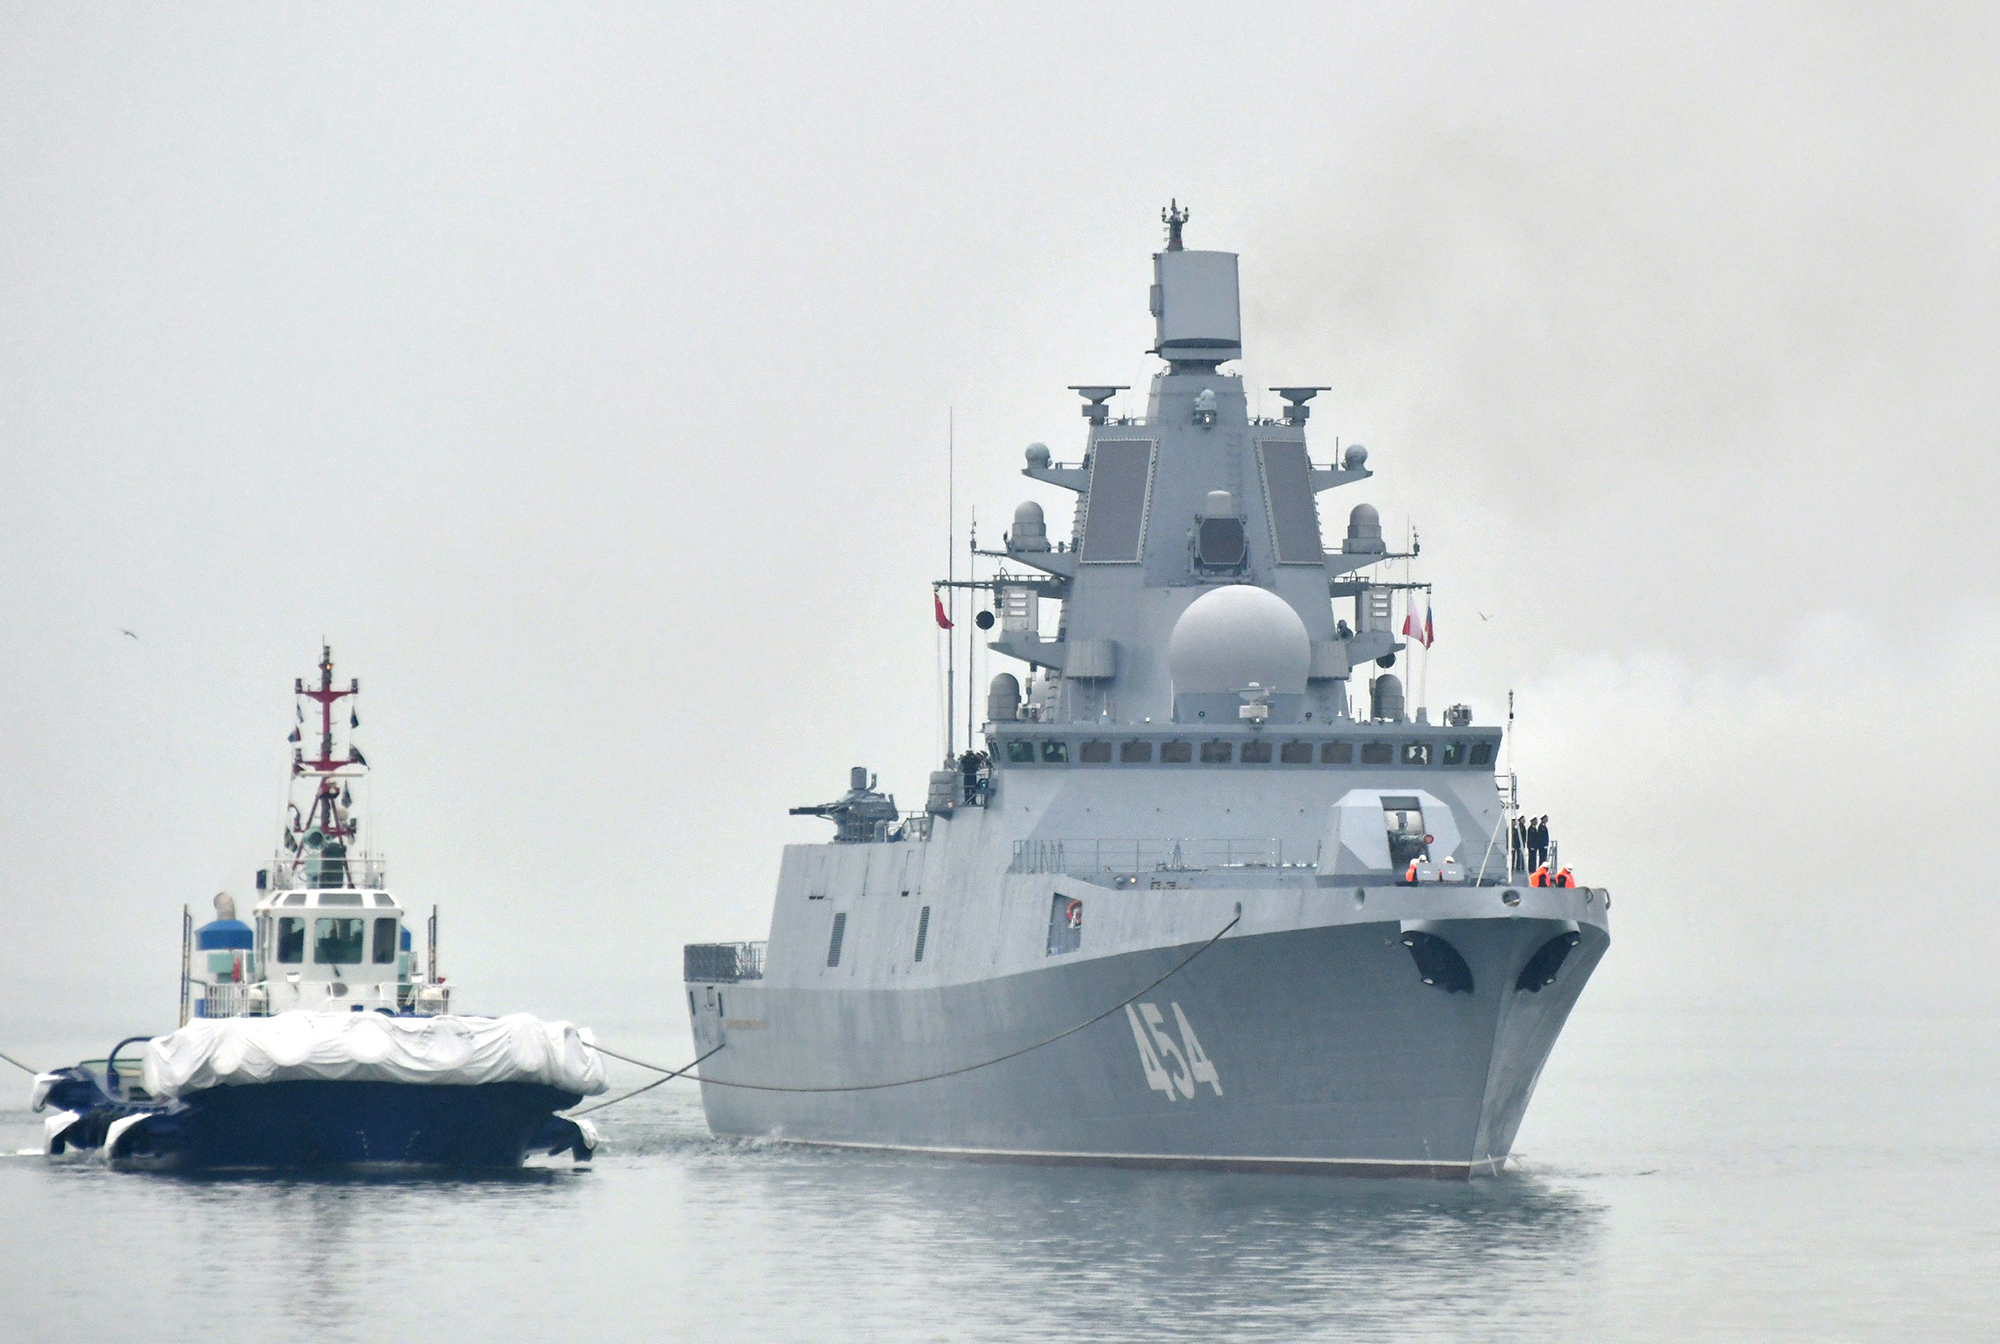 The Russian navy's guided missile frigate "Admiral Gorshkov" arrives in the port city of Qingdao, in east China's Shandong province, on April 21, 2019.